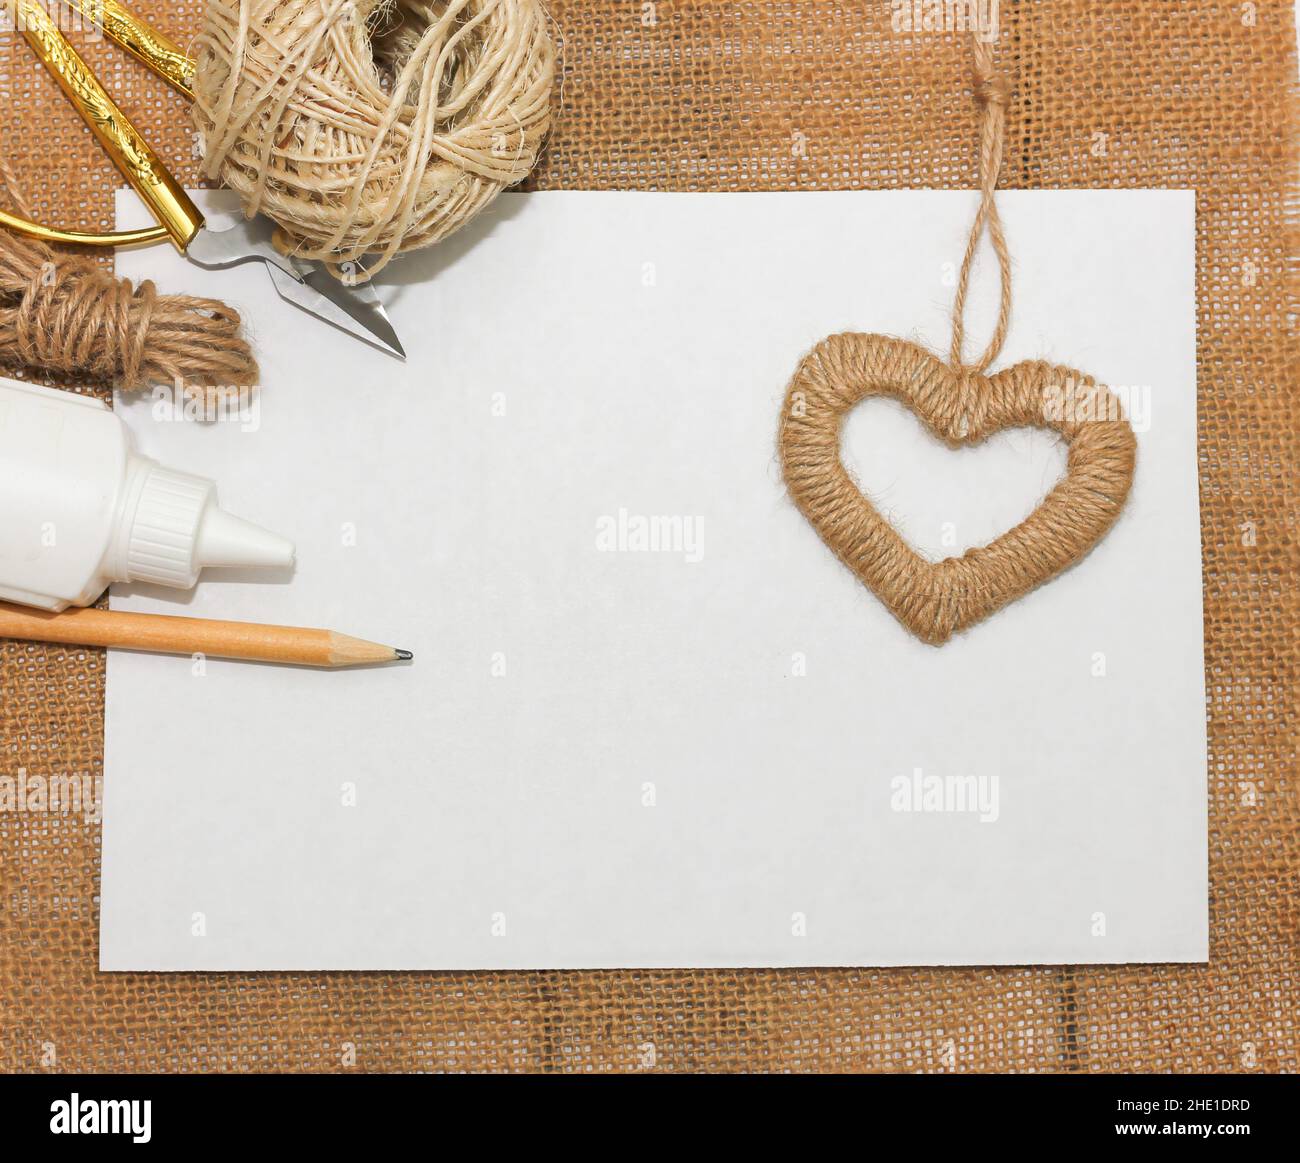 Making a jute heart for decorative design. Happy valentine's day background. People lifestyle concept. Romantic background Stock Photo